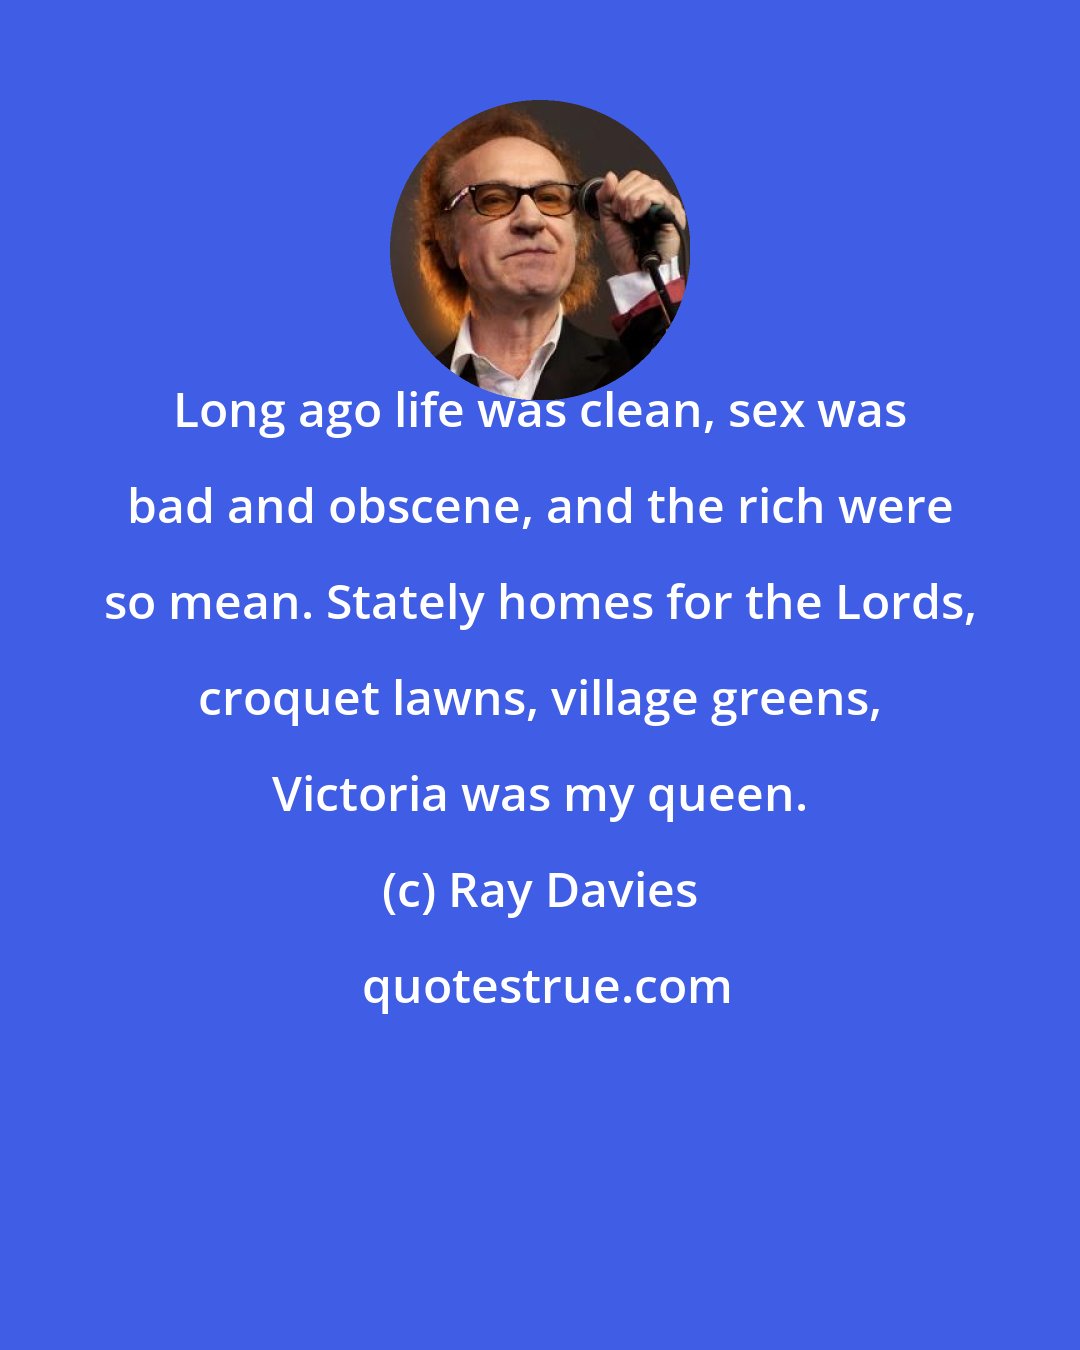 Ray Davies: Long ago life was clean, sex was bad and obscene, and the rich were so mean. Stately homes for the Lords, croquet lawns, village greens, Victoria was my queen.